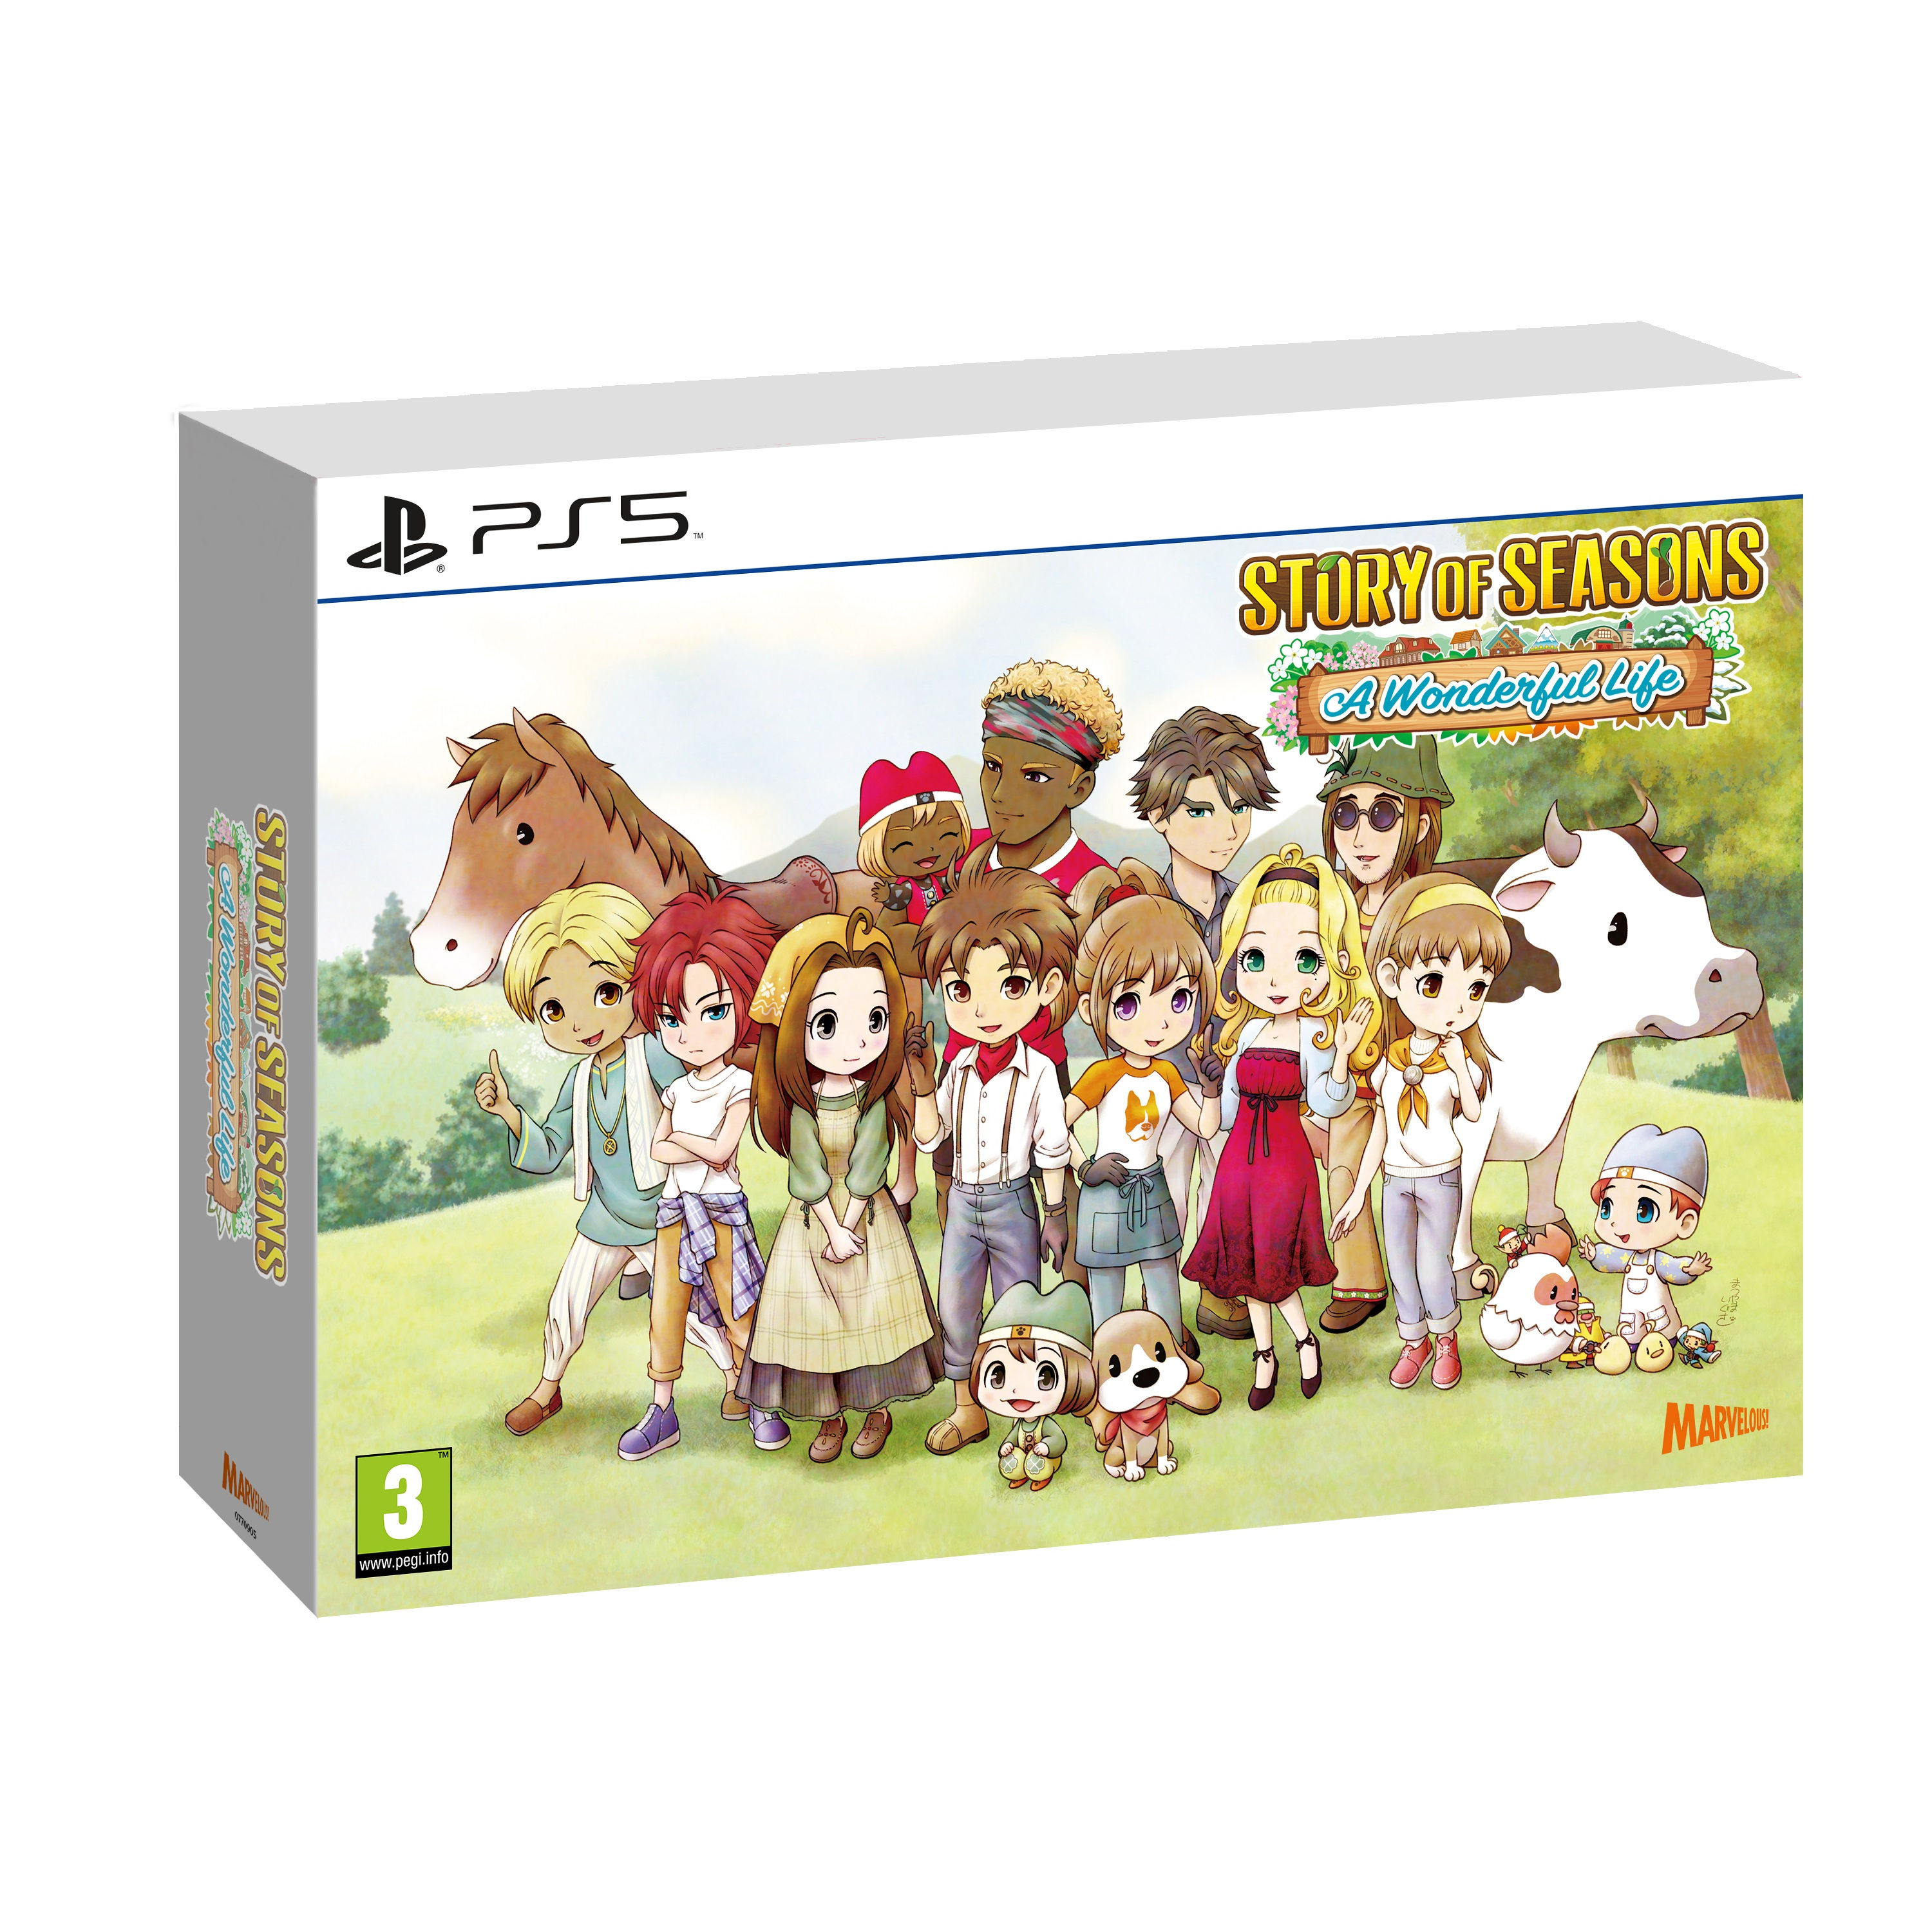 Story of Seasons A Wonderful Life - Limited Edition PlayStation 5